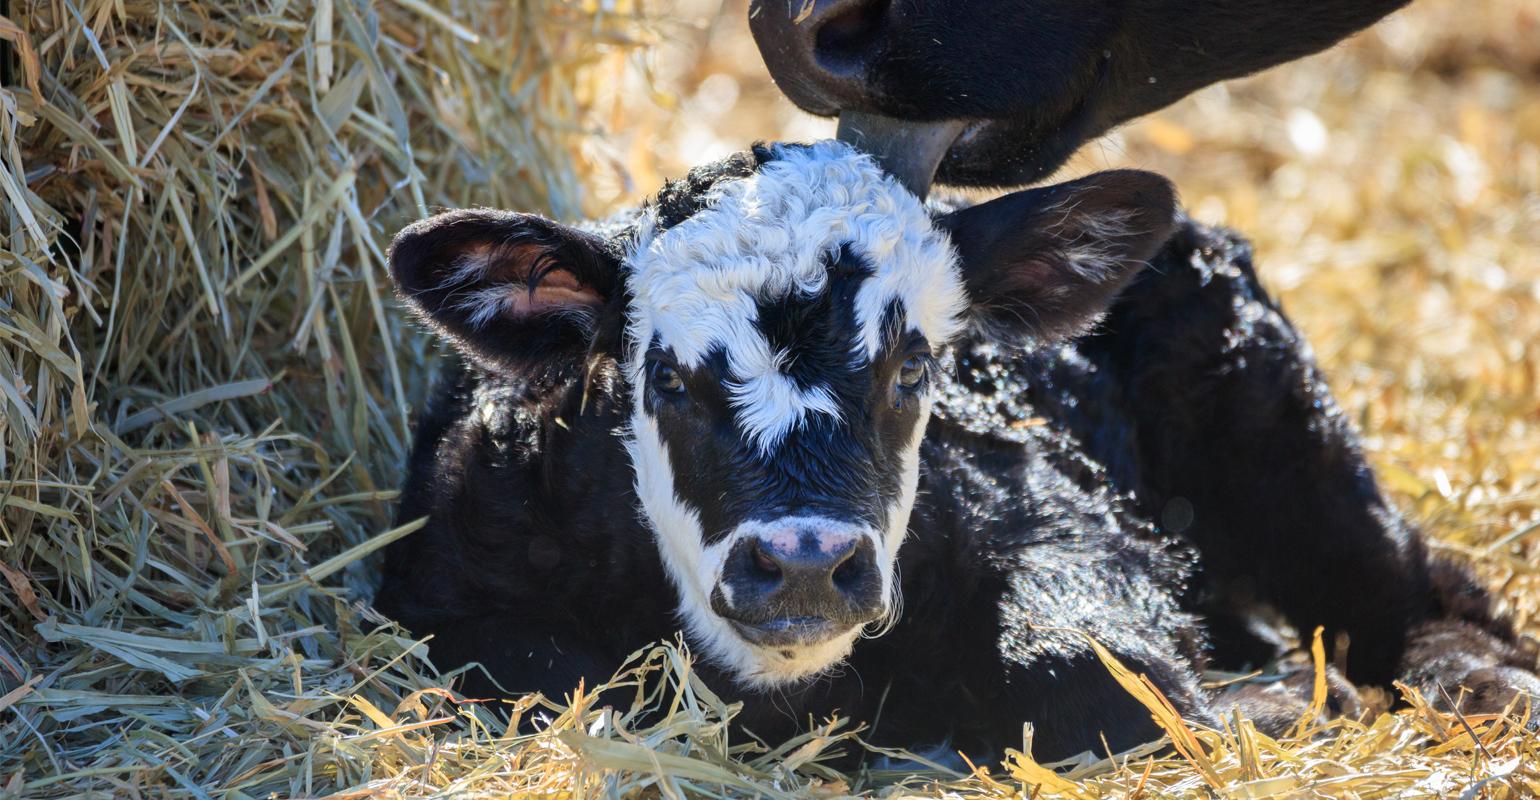 OSU's Paul Beck Says Ranchers Can Increase Production by Implanting Prior to Weaning